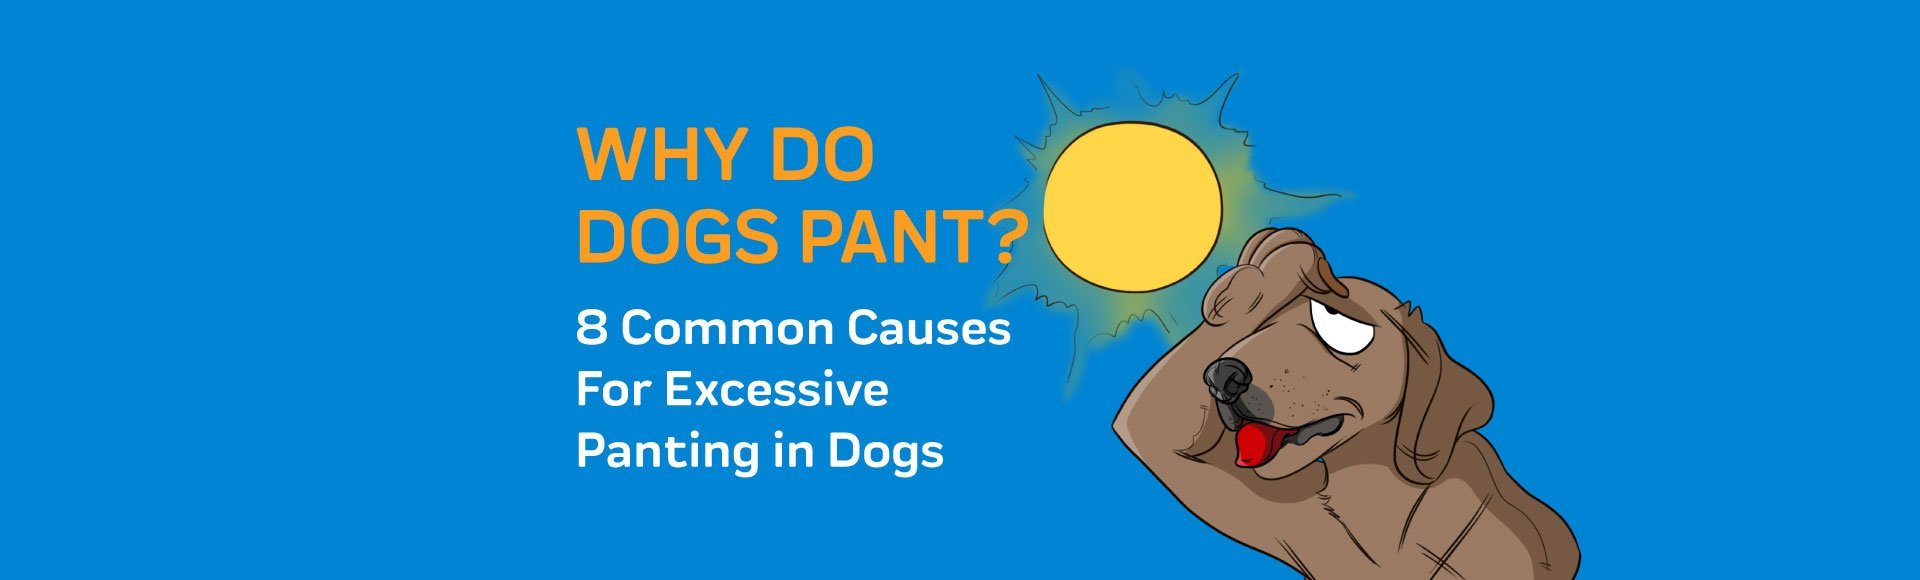 what causes excessive panting in dogs